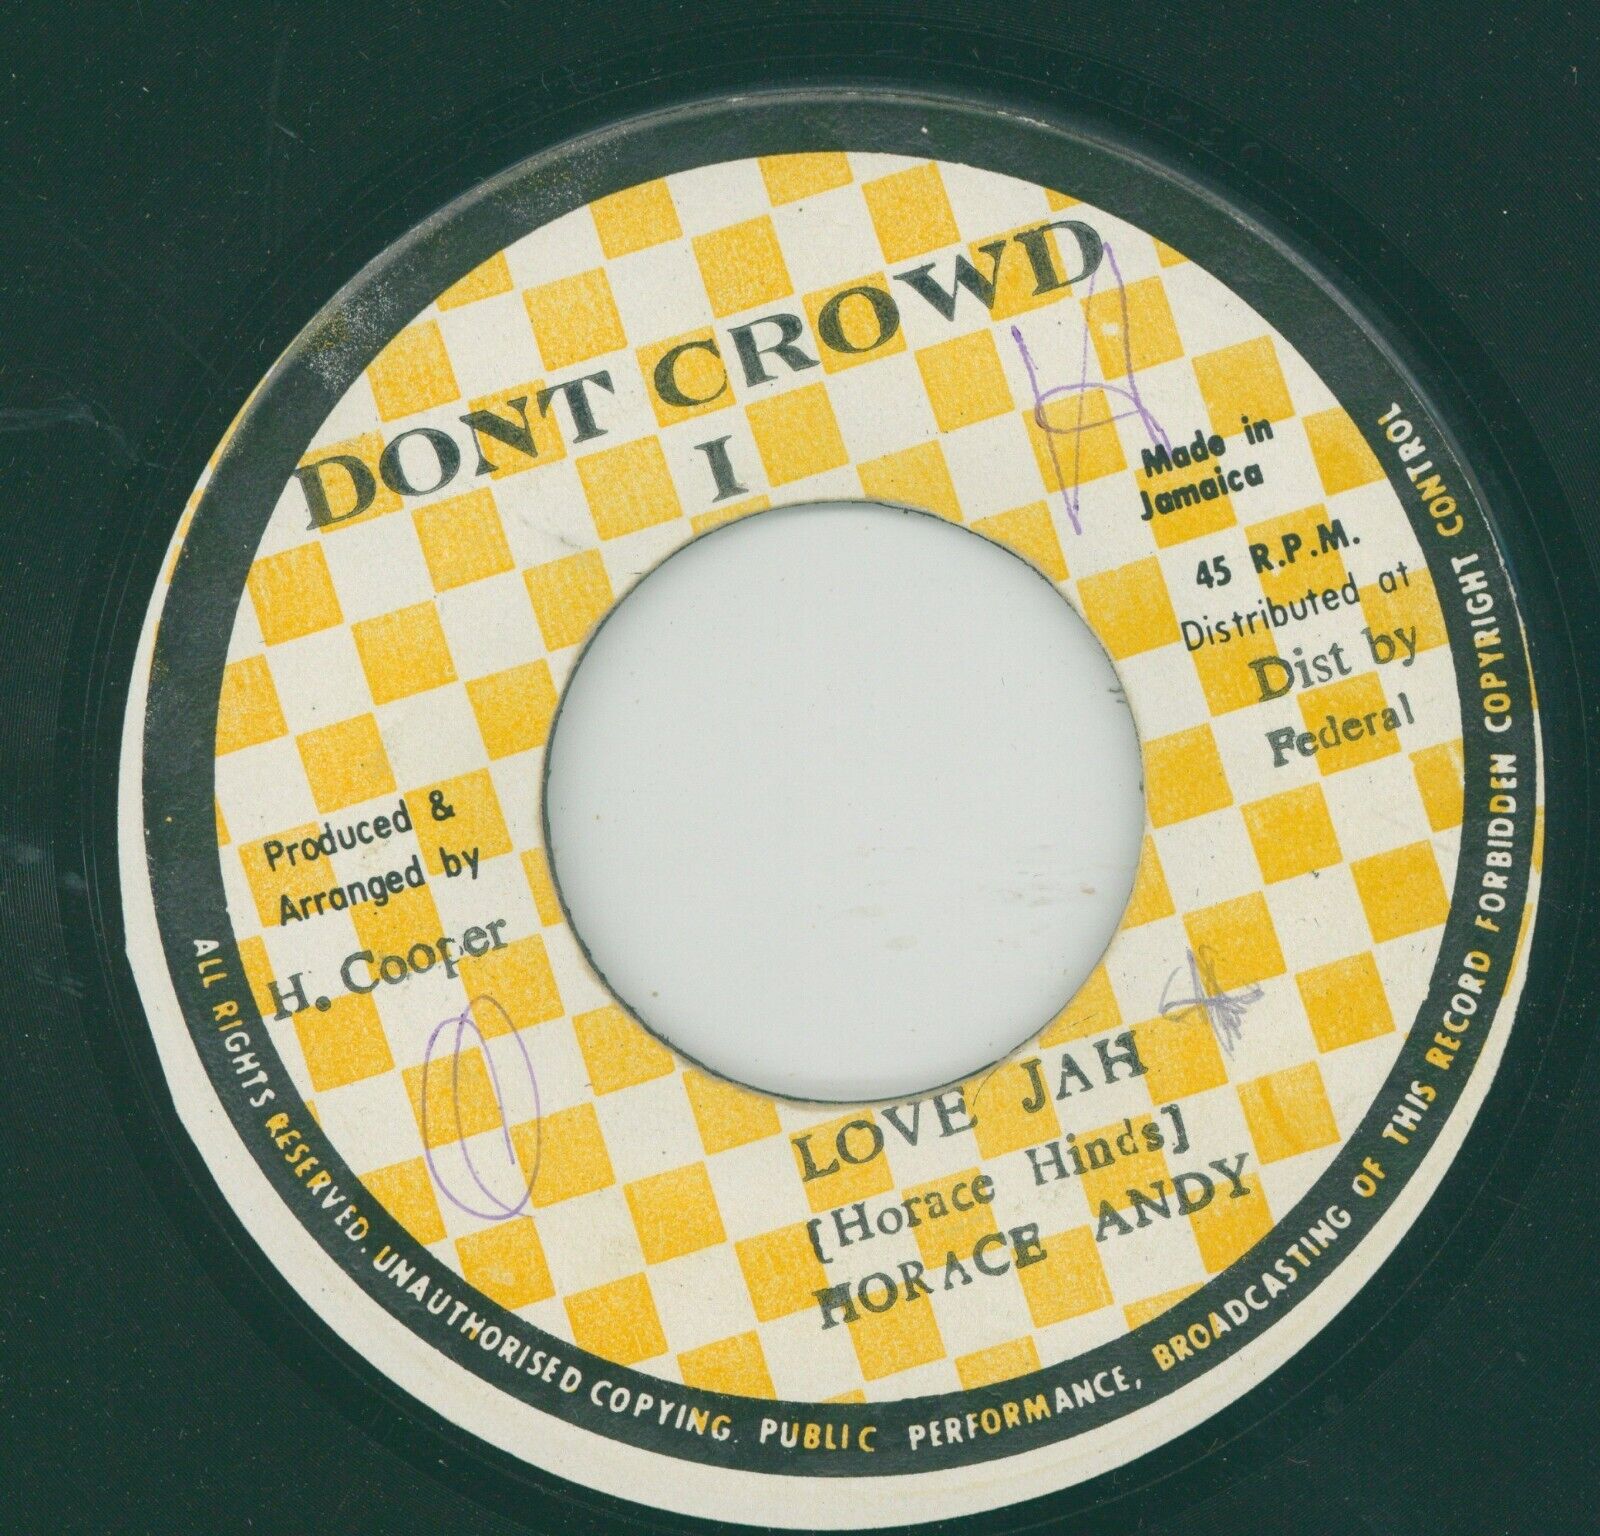 " LOVE JAH." horace andy. DON'T CROWD I 7in 1979.